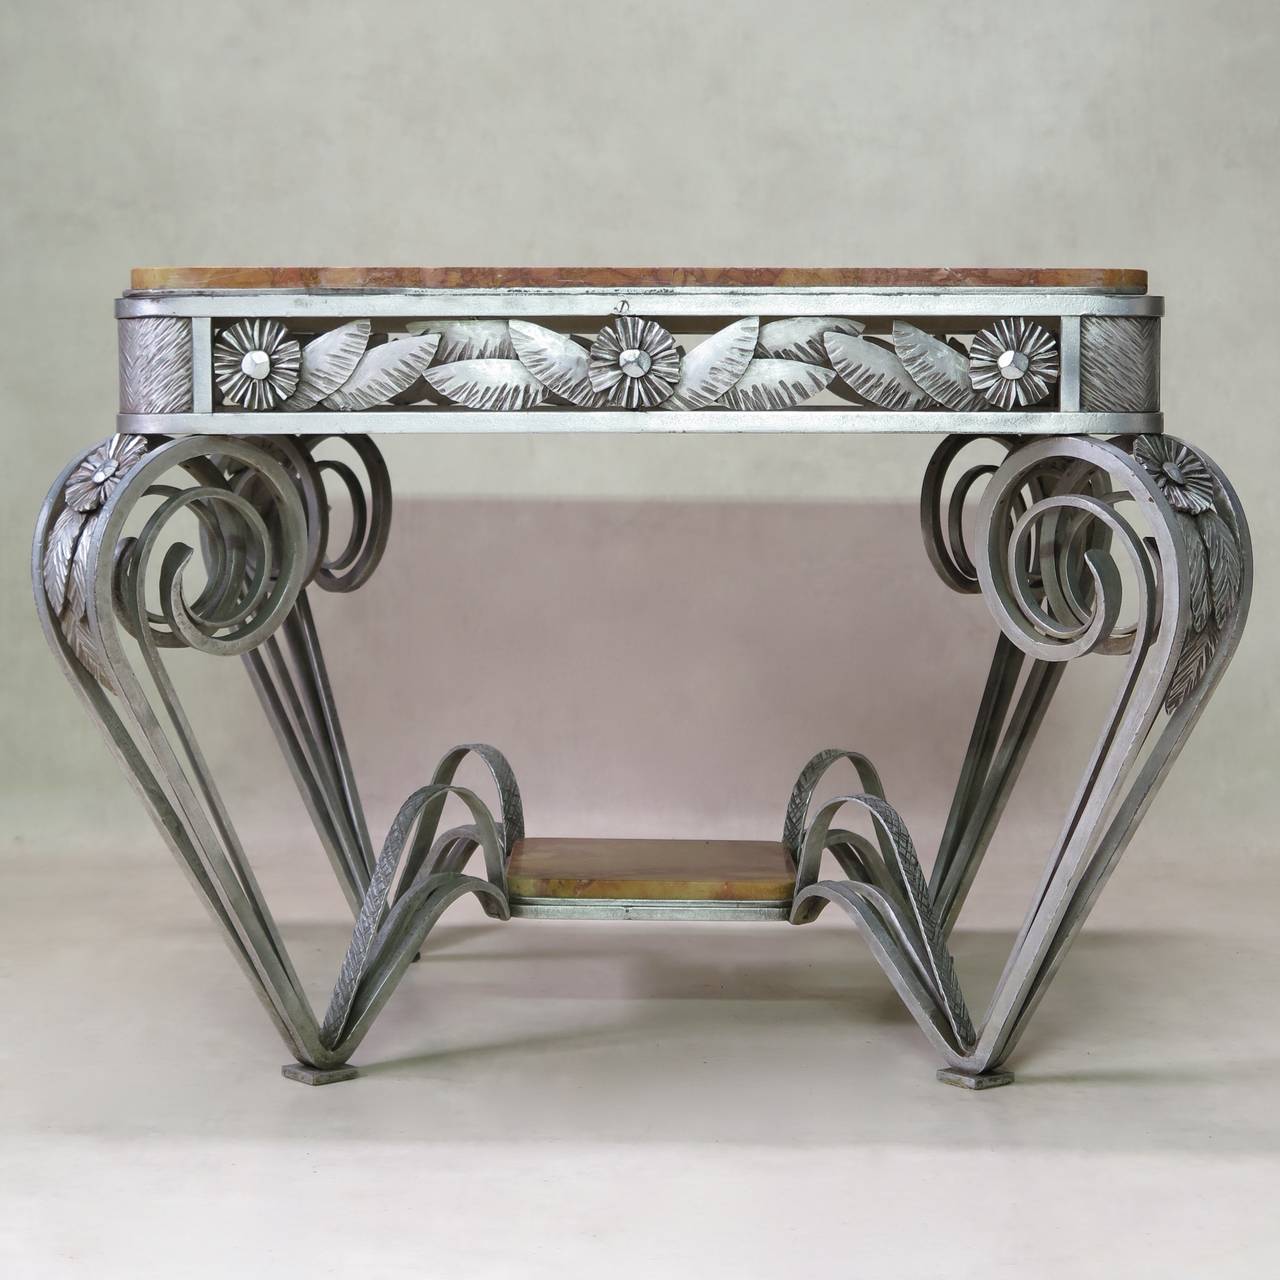 Beautifully crafted, hand-forged iron centre table with two tiers of red marble. The apron and knees are decorated with large, stylized daisies. Exaggeratedly swirled details, dramatically tapering base. Original silver finish. Unique and stunning